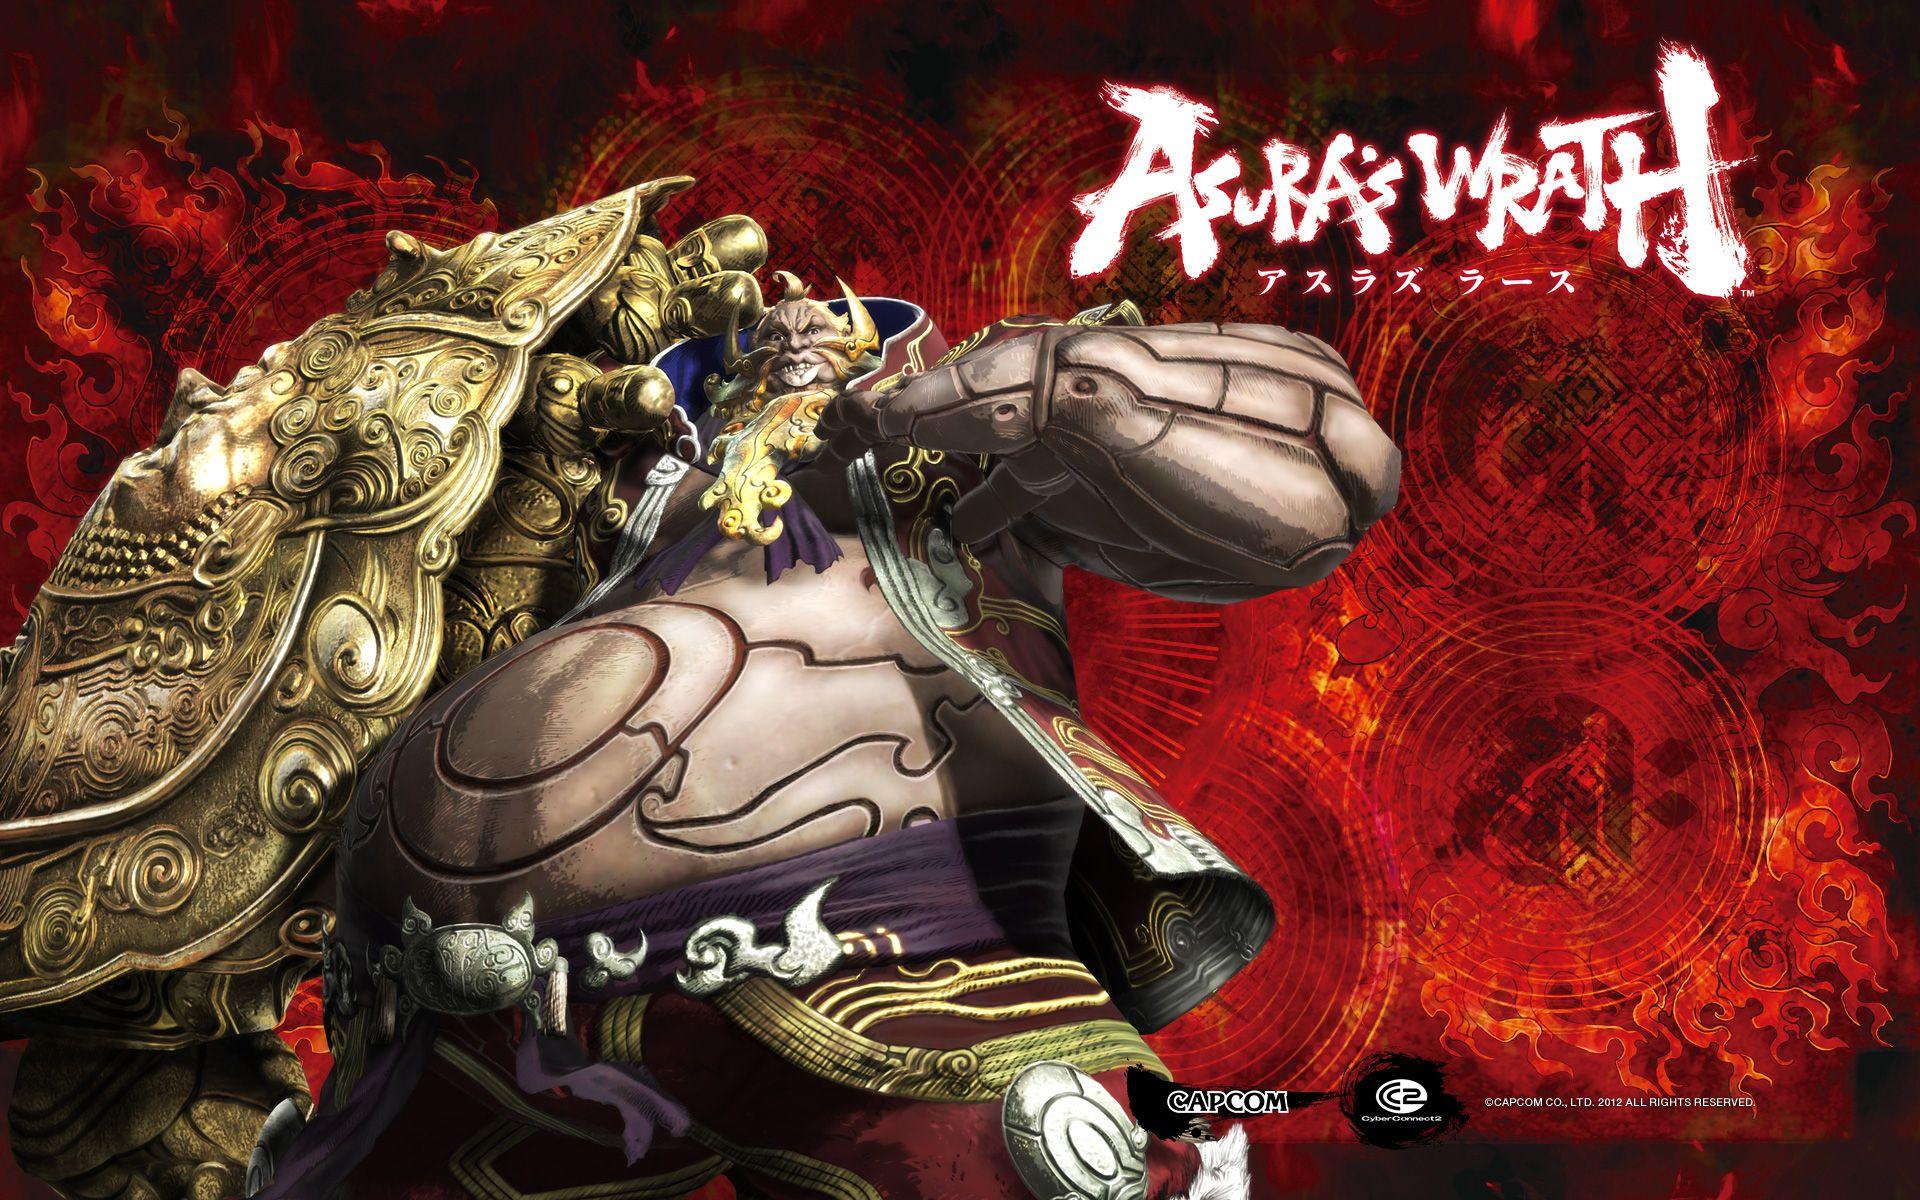 Image of Asuras Wrath Wallpapers Pictures.